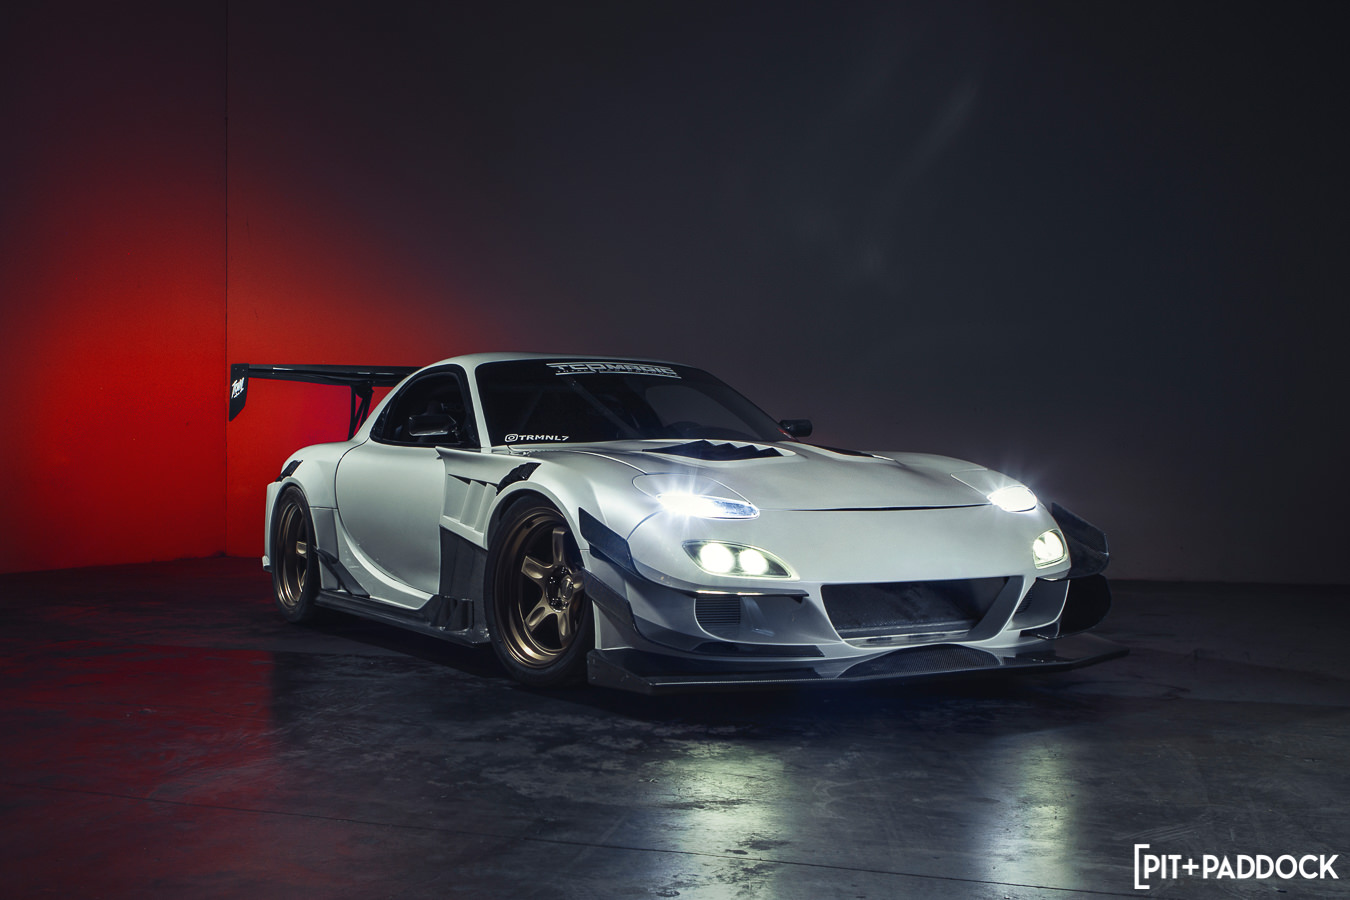 Mazda RX-7 With 700hp 13B-REW Shoots Flames For Inaugural Poster Shoot